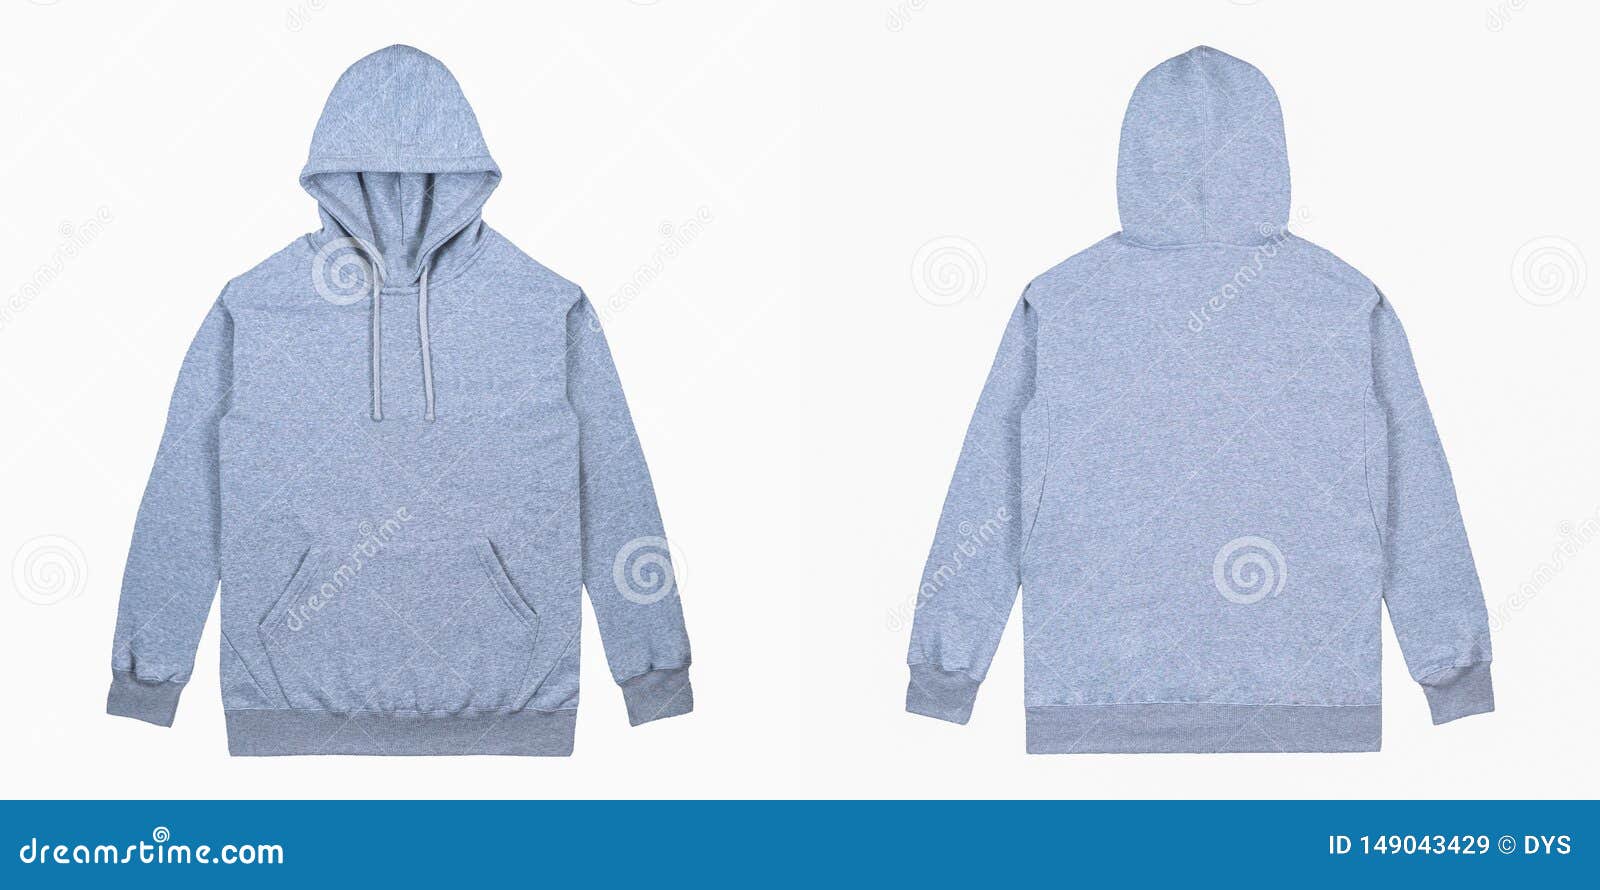 Download Blank Plain Pullover Hoodie Front And Back View With ...